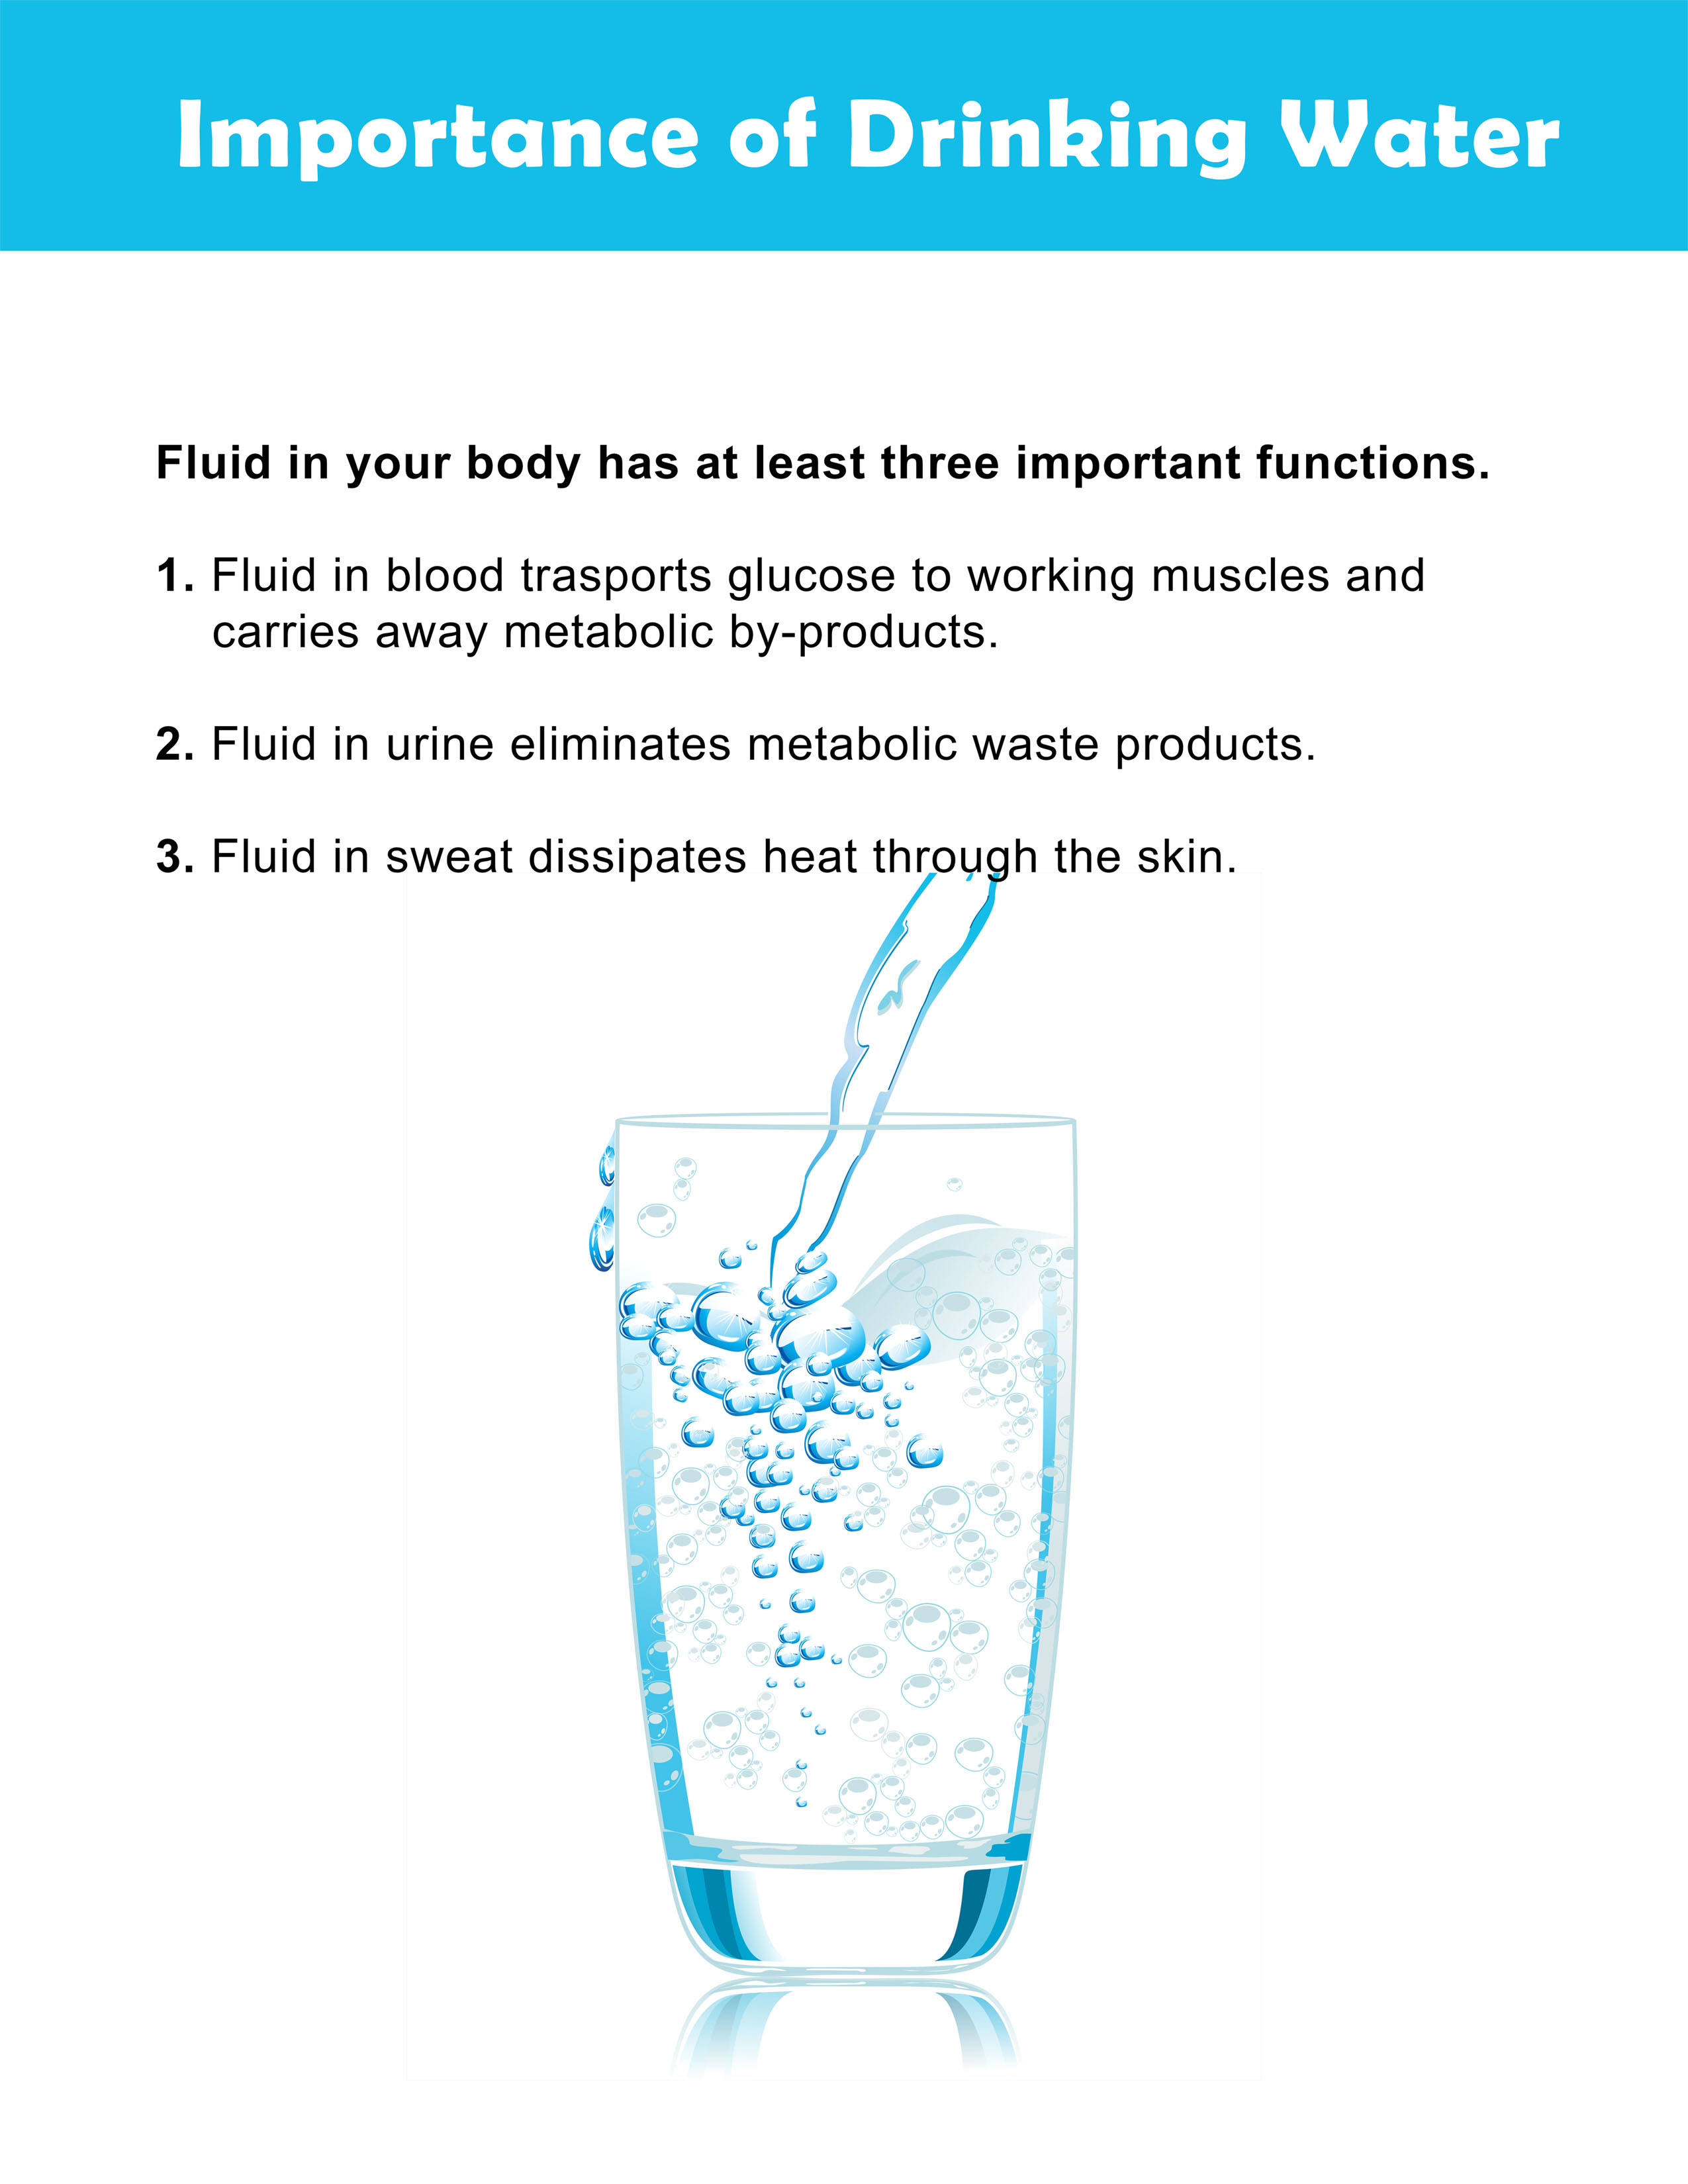 Importance of drinking water chart you can may download and print.